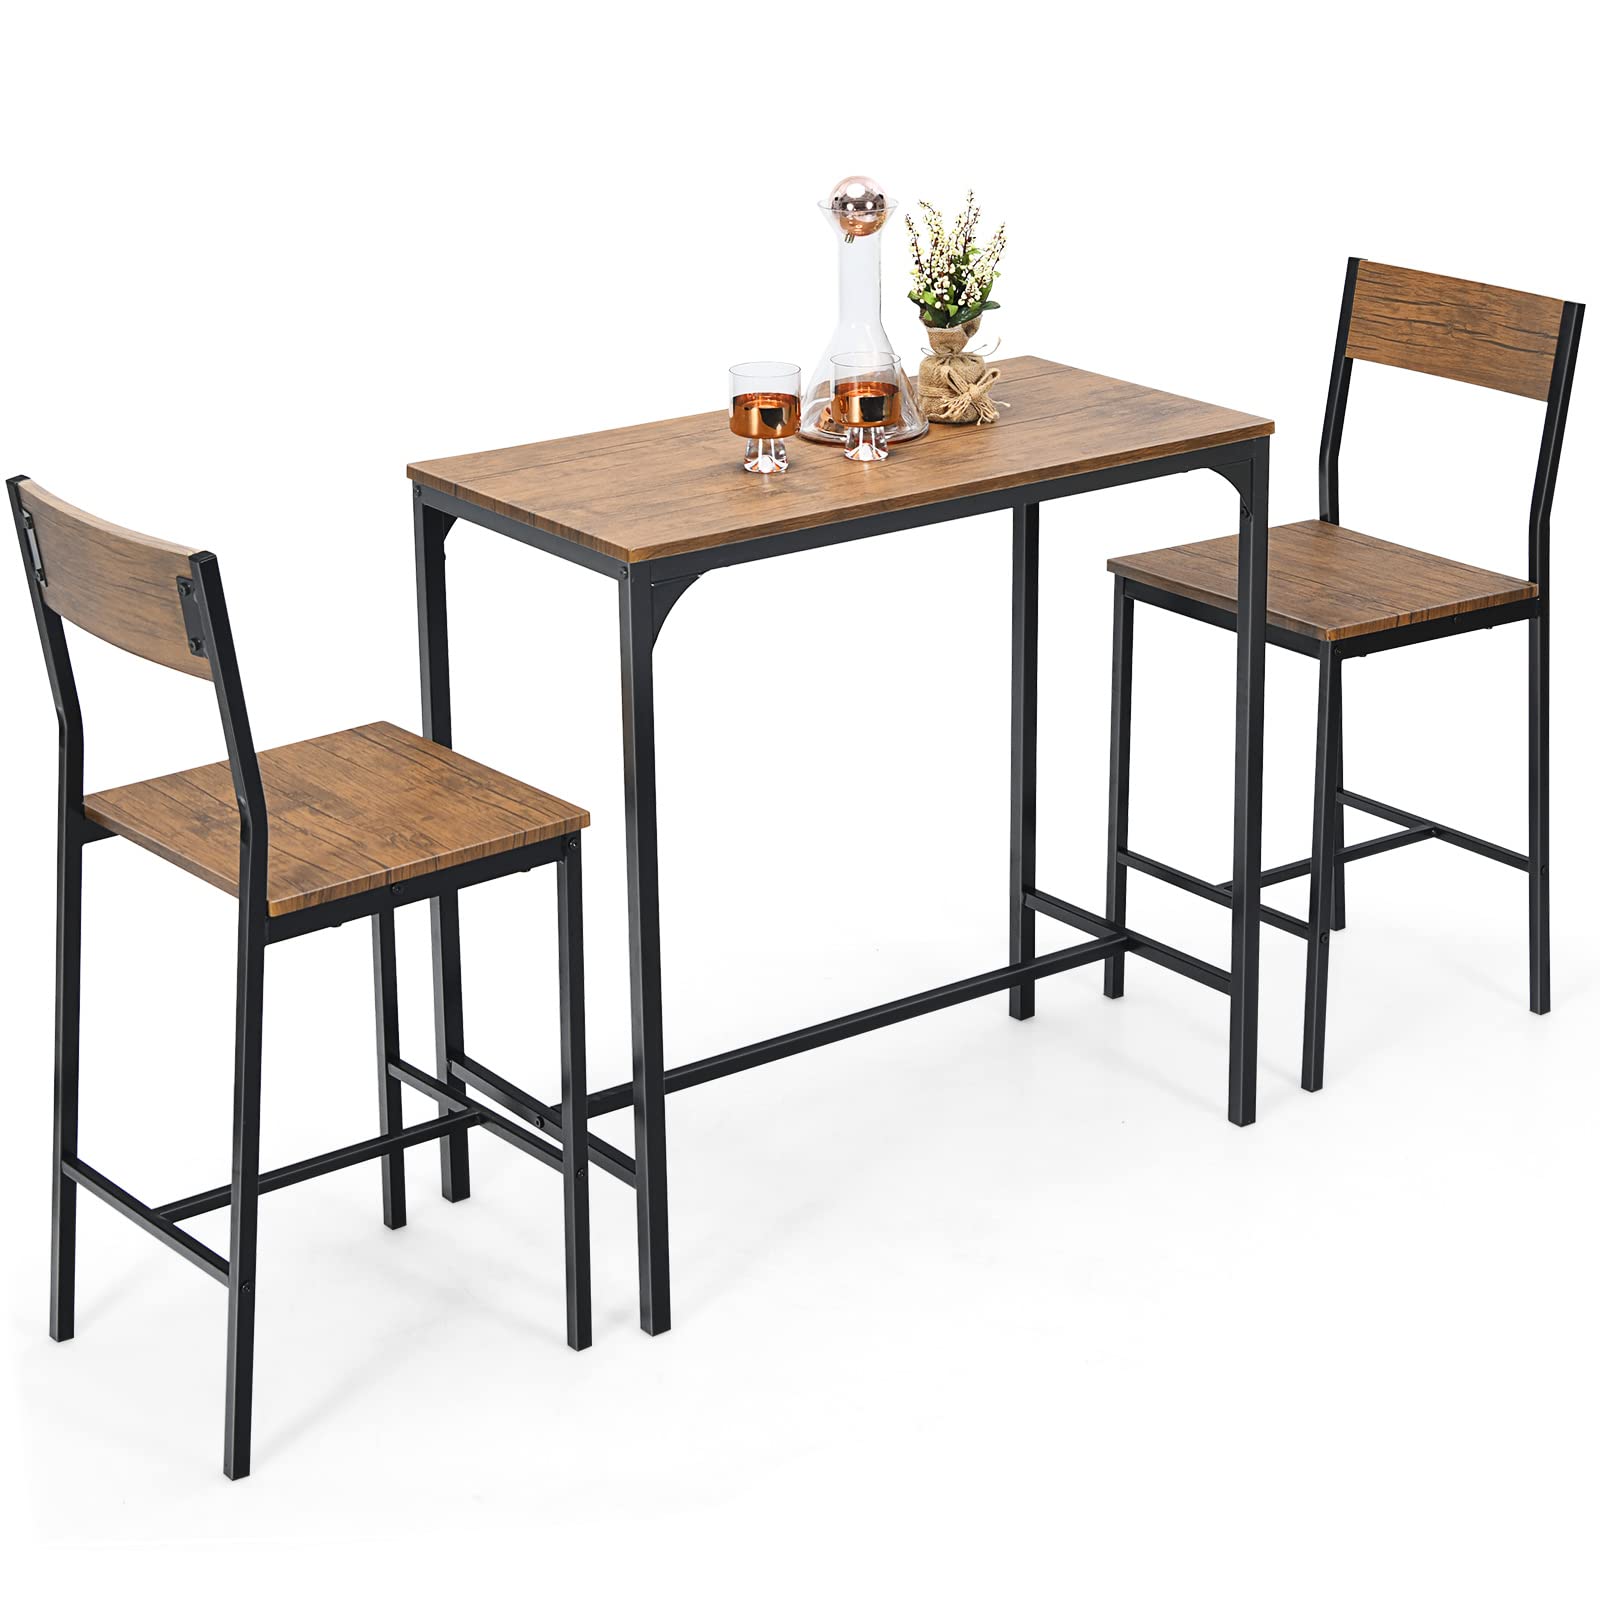 Giantex 3 Piece Pub Table Set, Bar Table and Chairs Set of 2, Rustic Brown